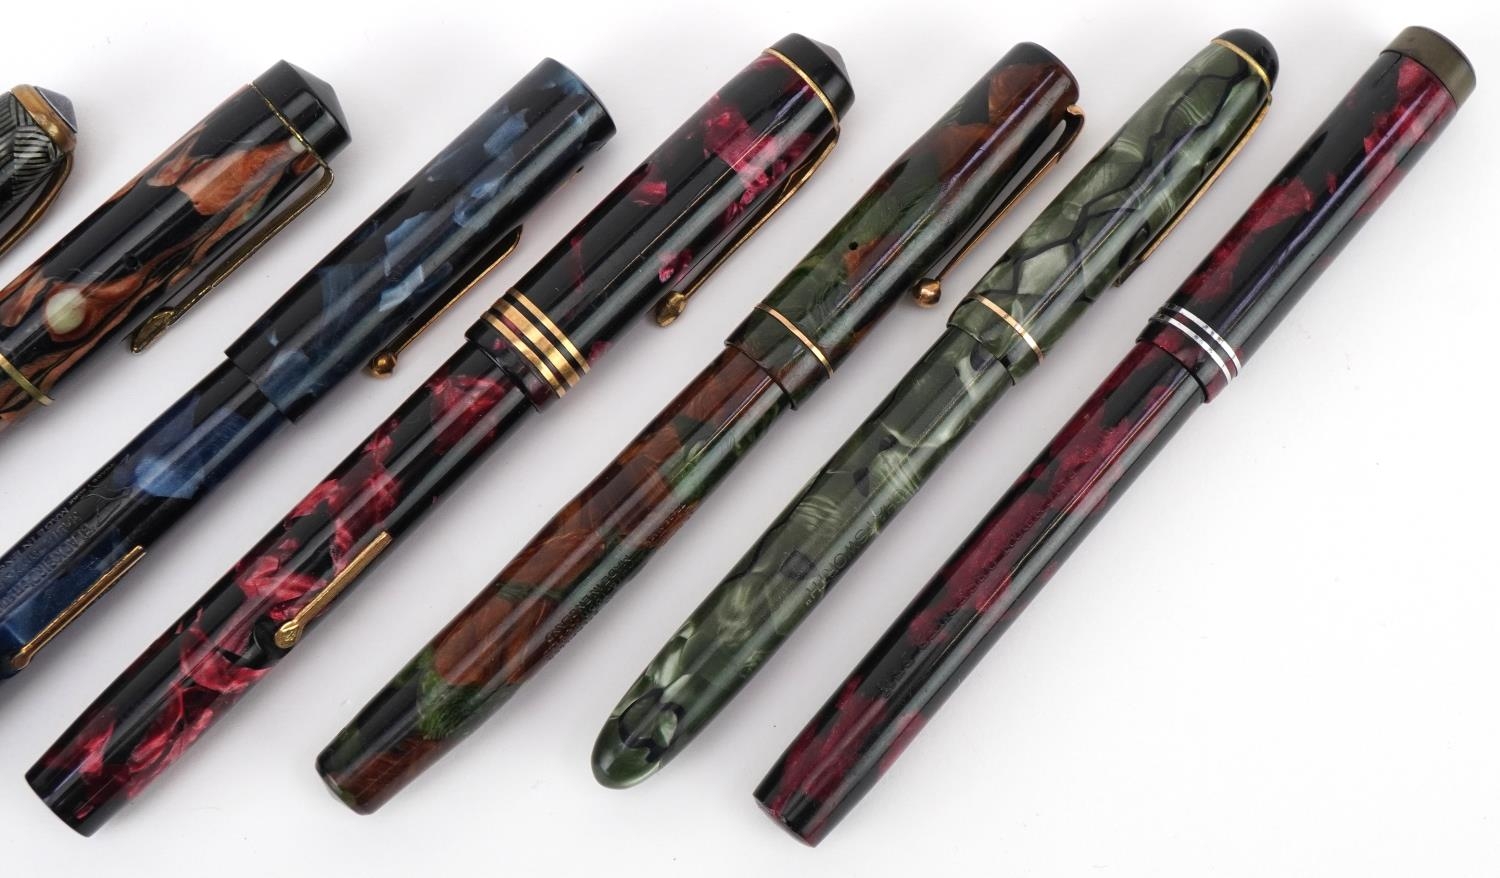 Vintage marbleised fountain pens including Blackbird and Swan - Image 3 of 6